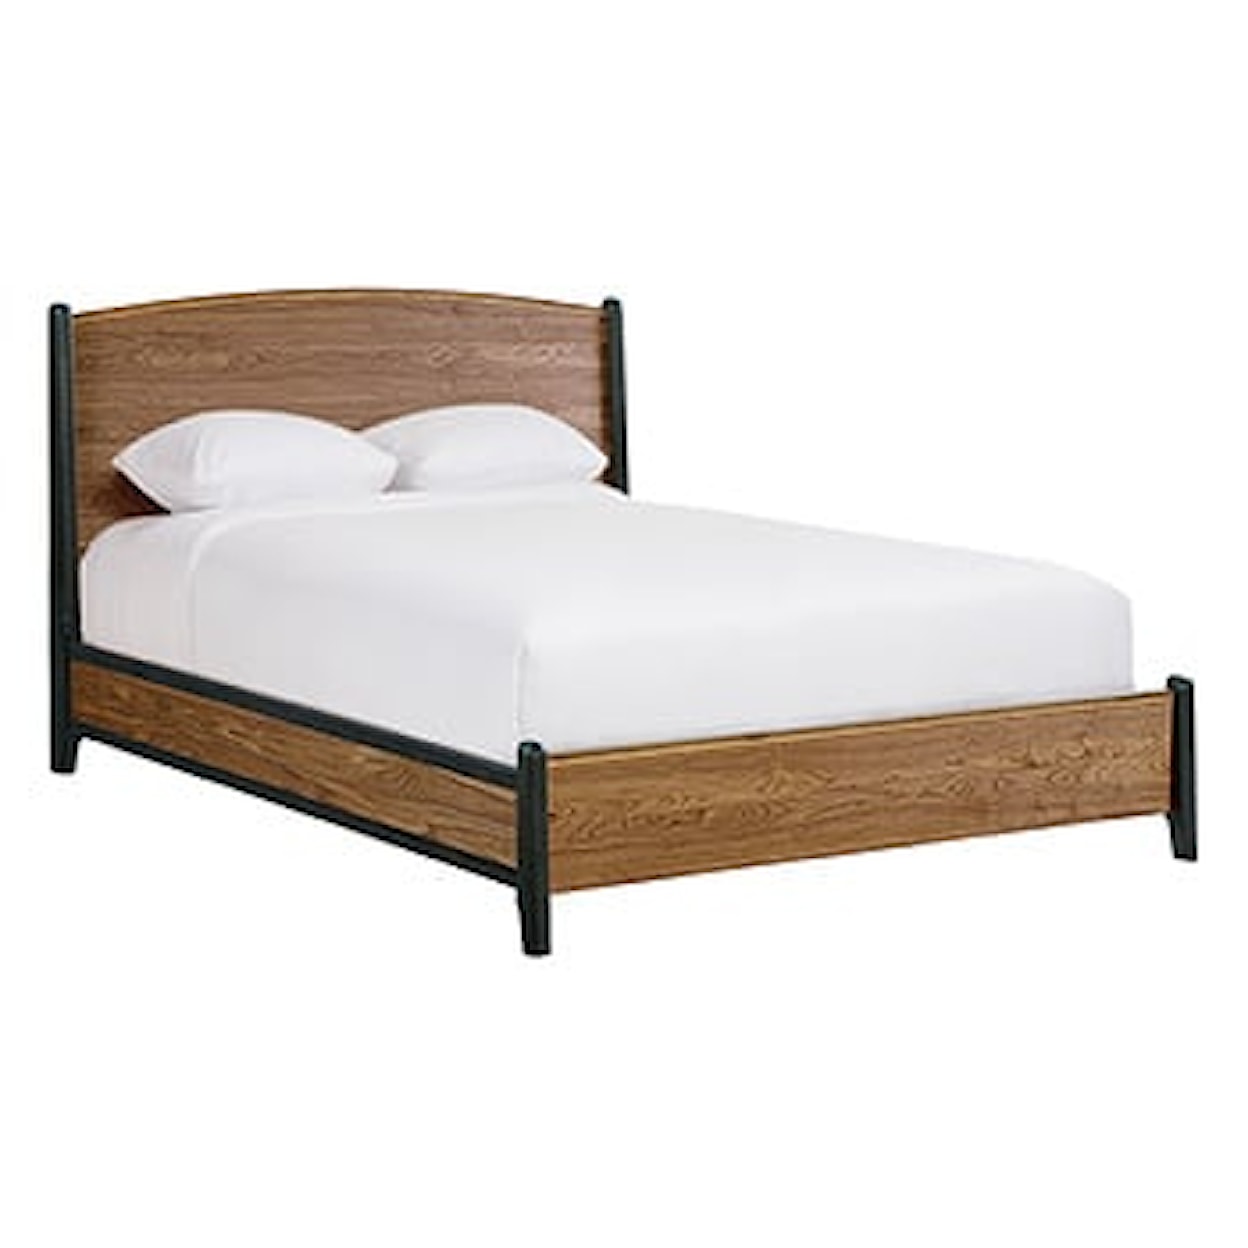 Whittier Wood Bryce Queen Curved Panel Bed